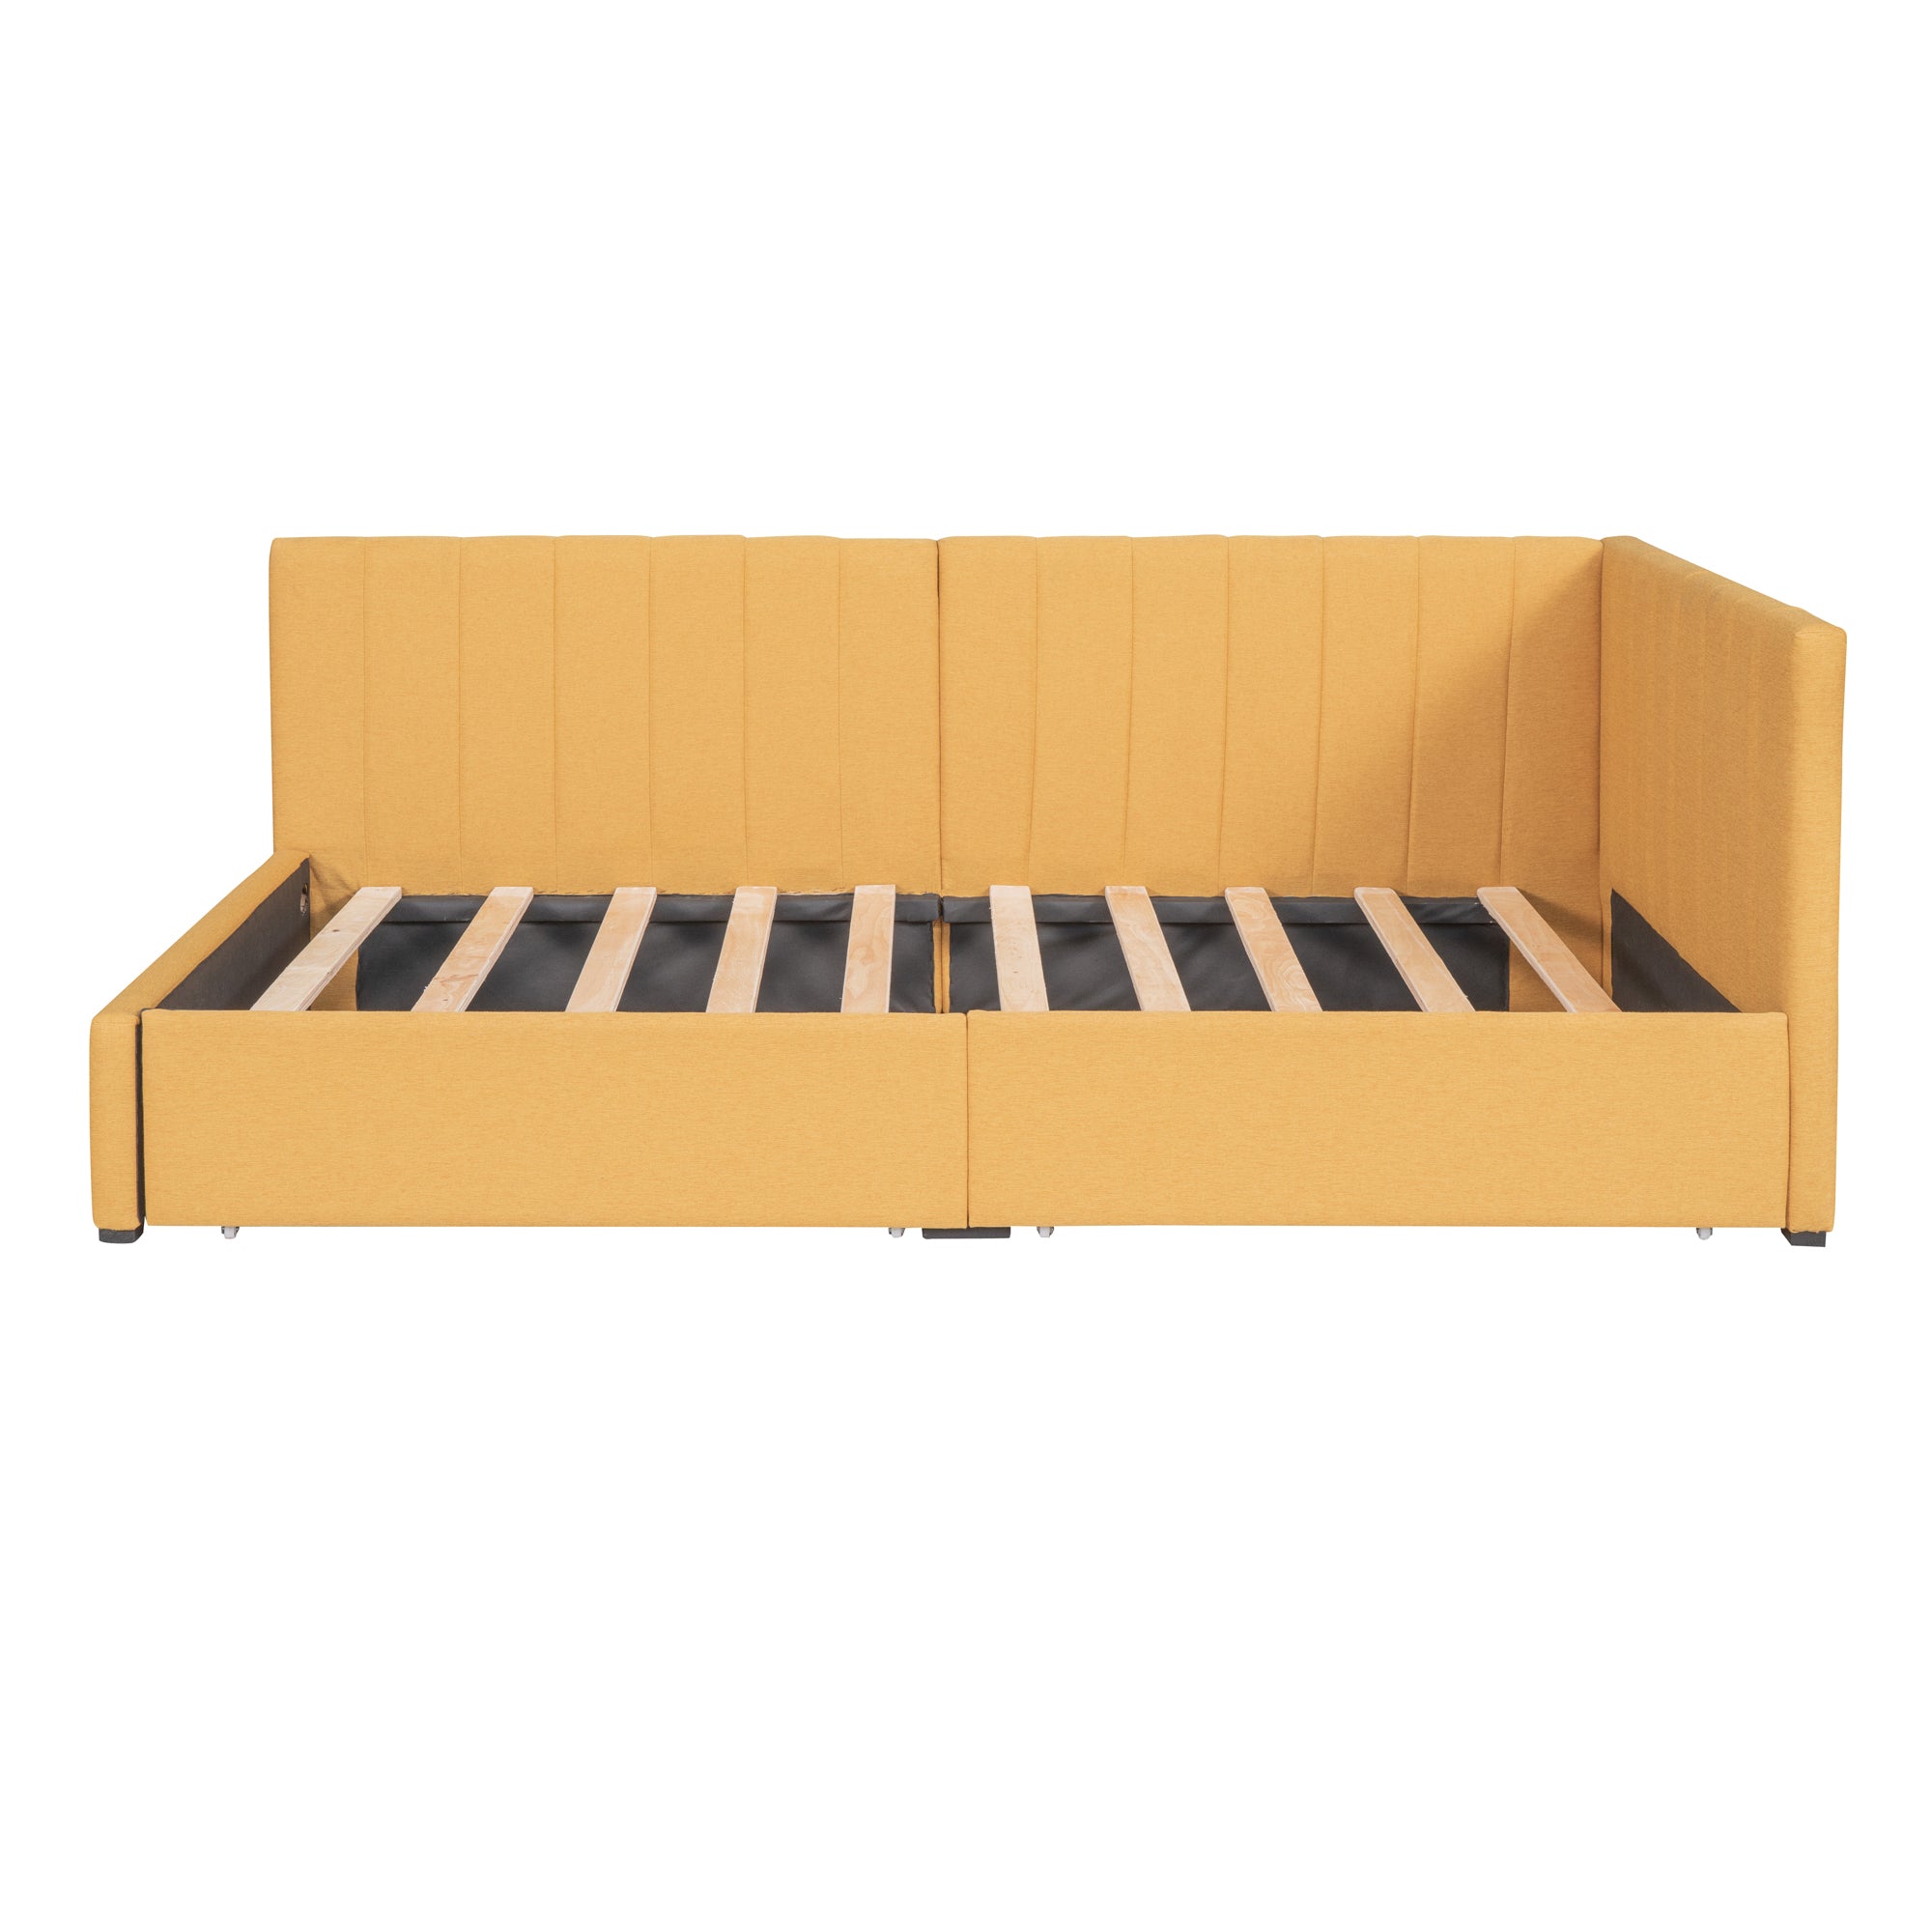 Upholstered Daybed with 2 Storage Drawers Twin Size yellow-upholstered